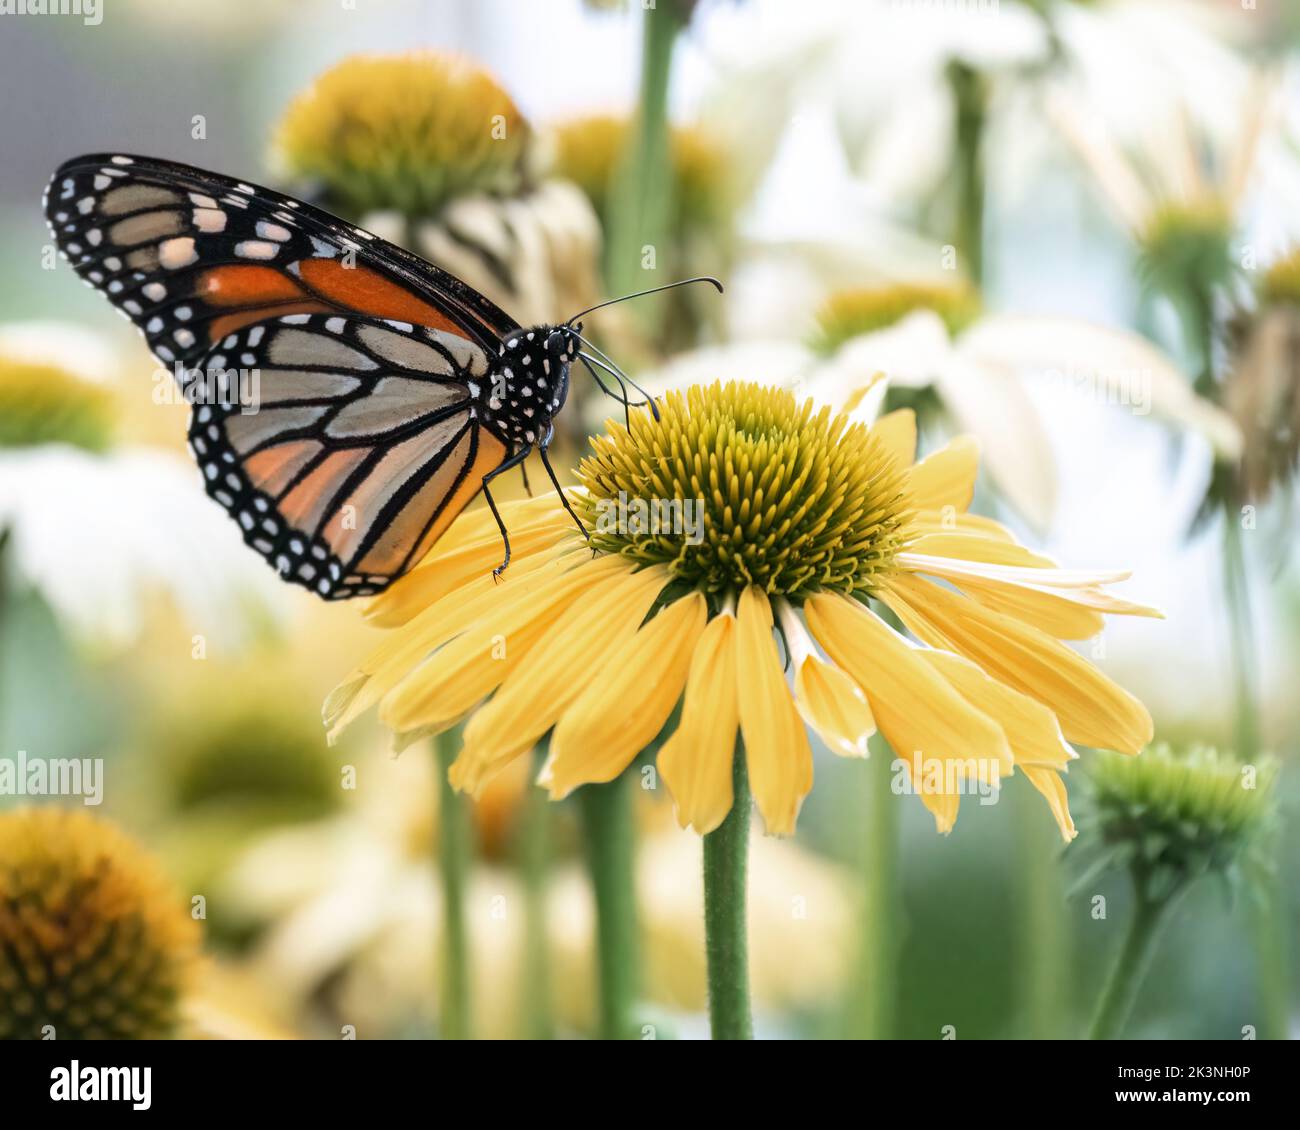 Monarch butterfly closeup perched on yellow flower in bright garden with white and green blurred flowers in background Stock Photo